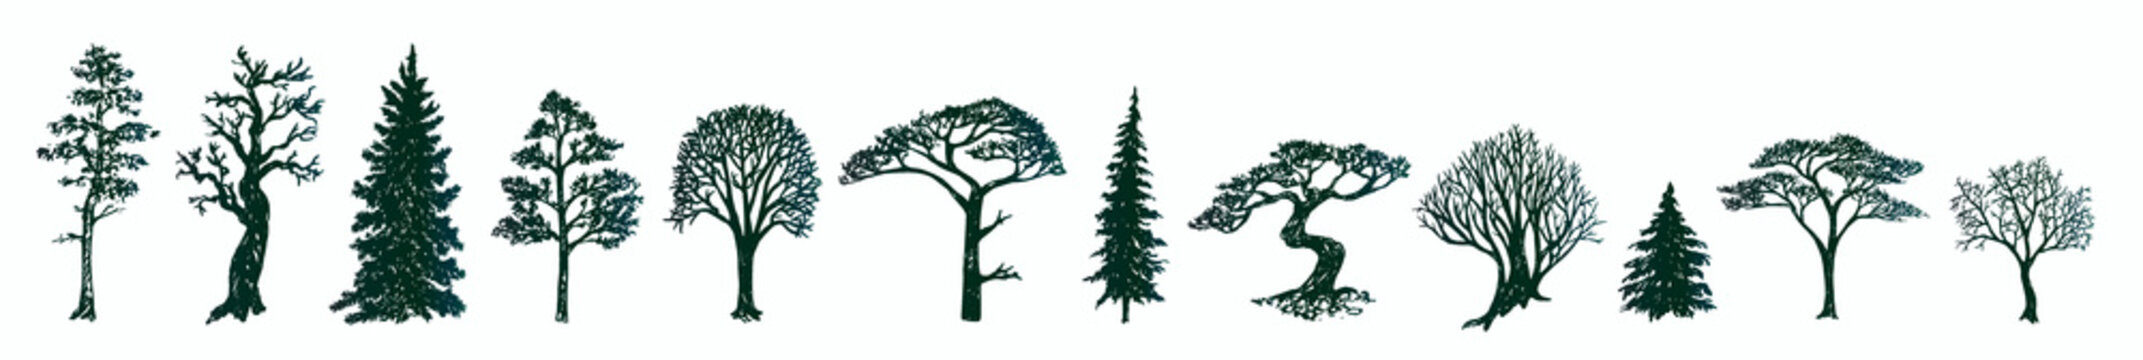 Trees silhouette collection, hand drawn doodle sketch, black and white vector illustration